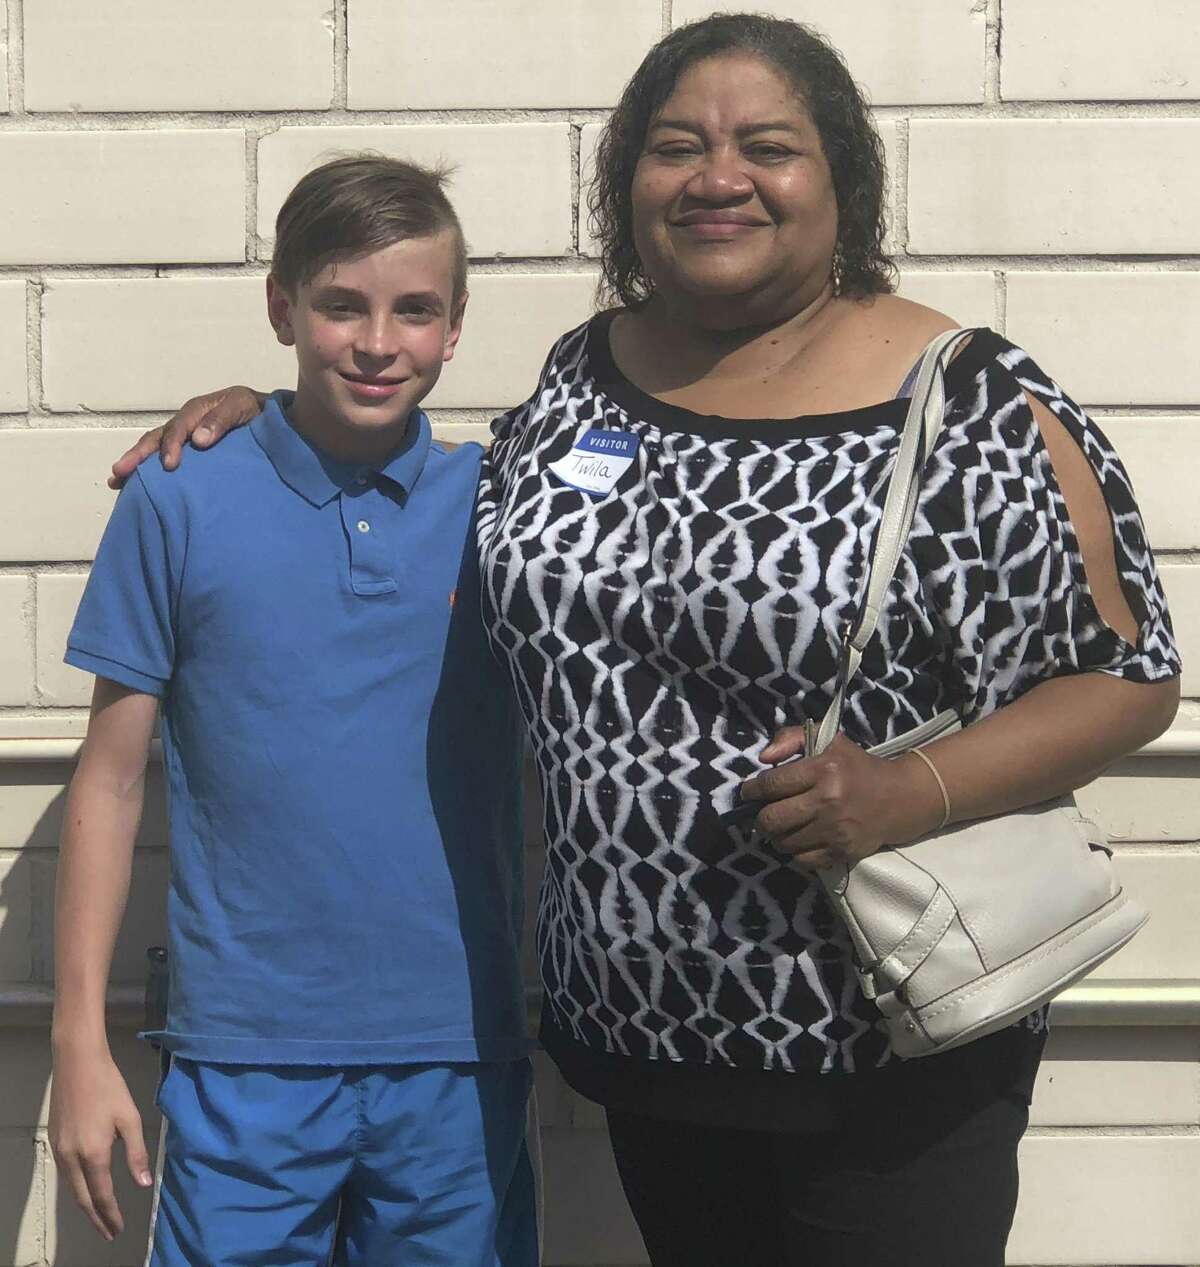 Eastside Elementary student Jacob Haley (left) is nominated by his teacher Twila Cotton (right) to attend the Lone Star Leadership Academy’s summer 2018 camp in the Dallas/Fort Worth area. The academy engages students in grades fourth through eighth from across the State of Texas to learn the history of one of the three major metropolitan areas and to develop leadership skills.